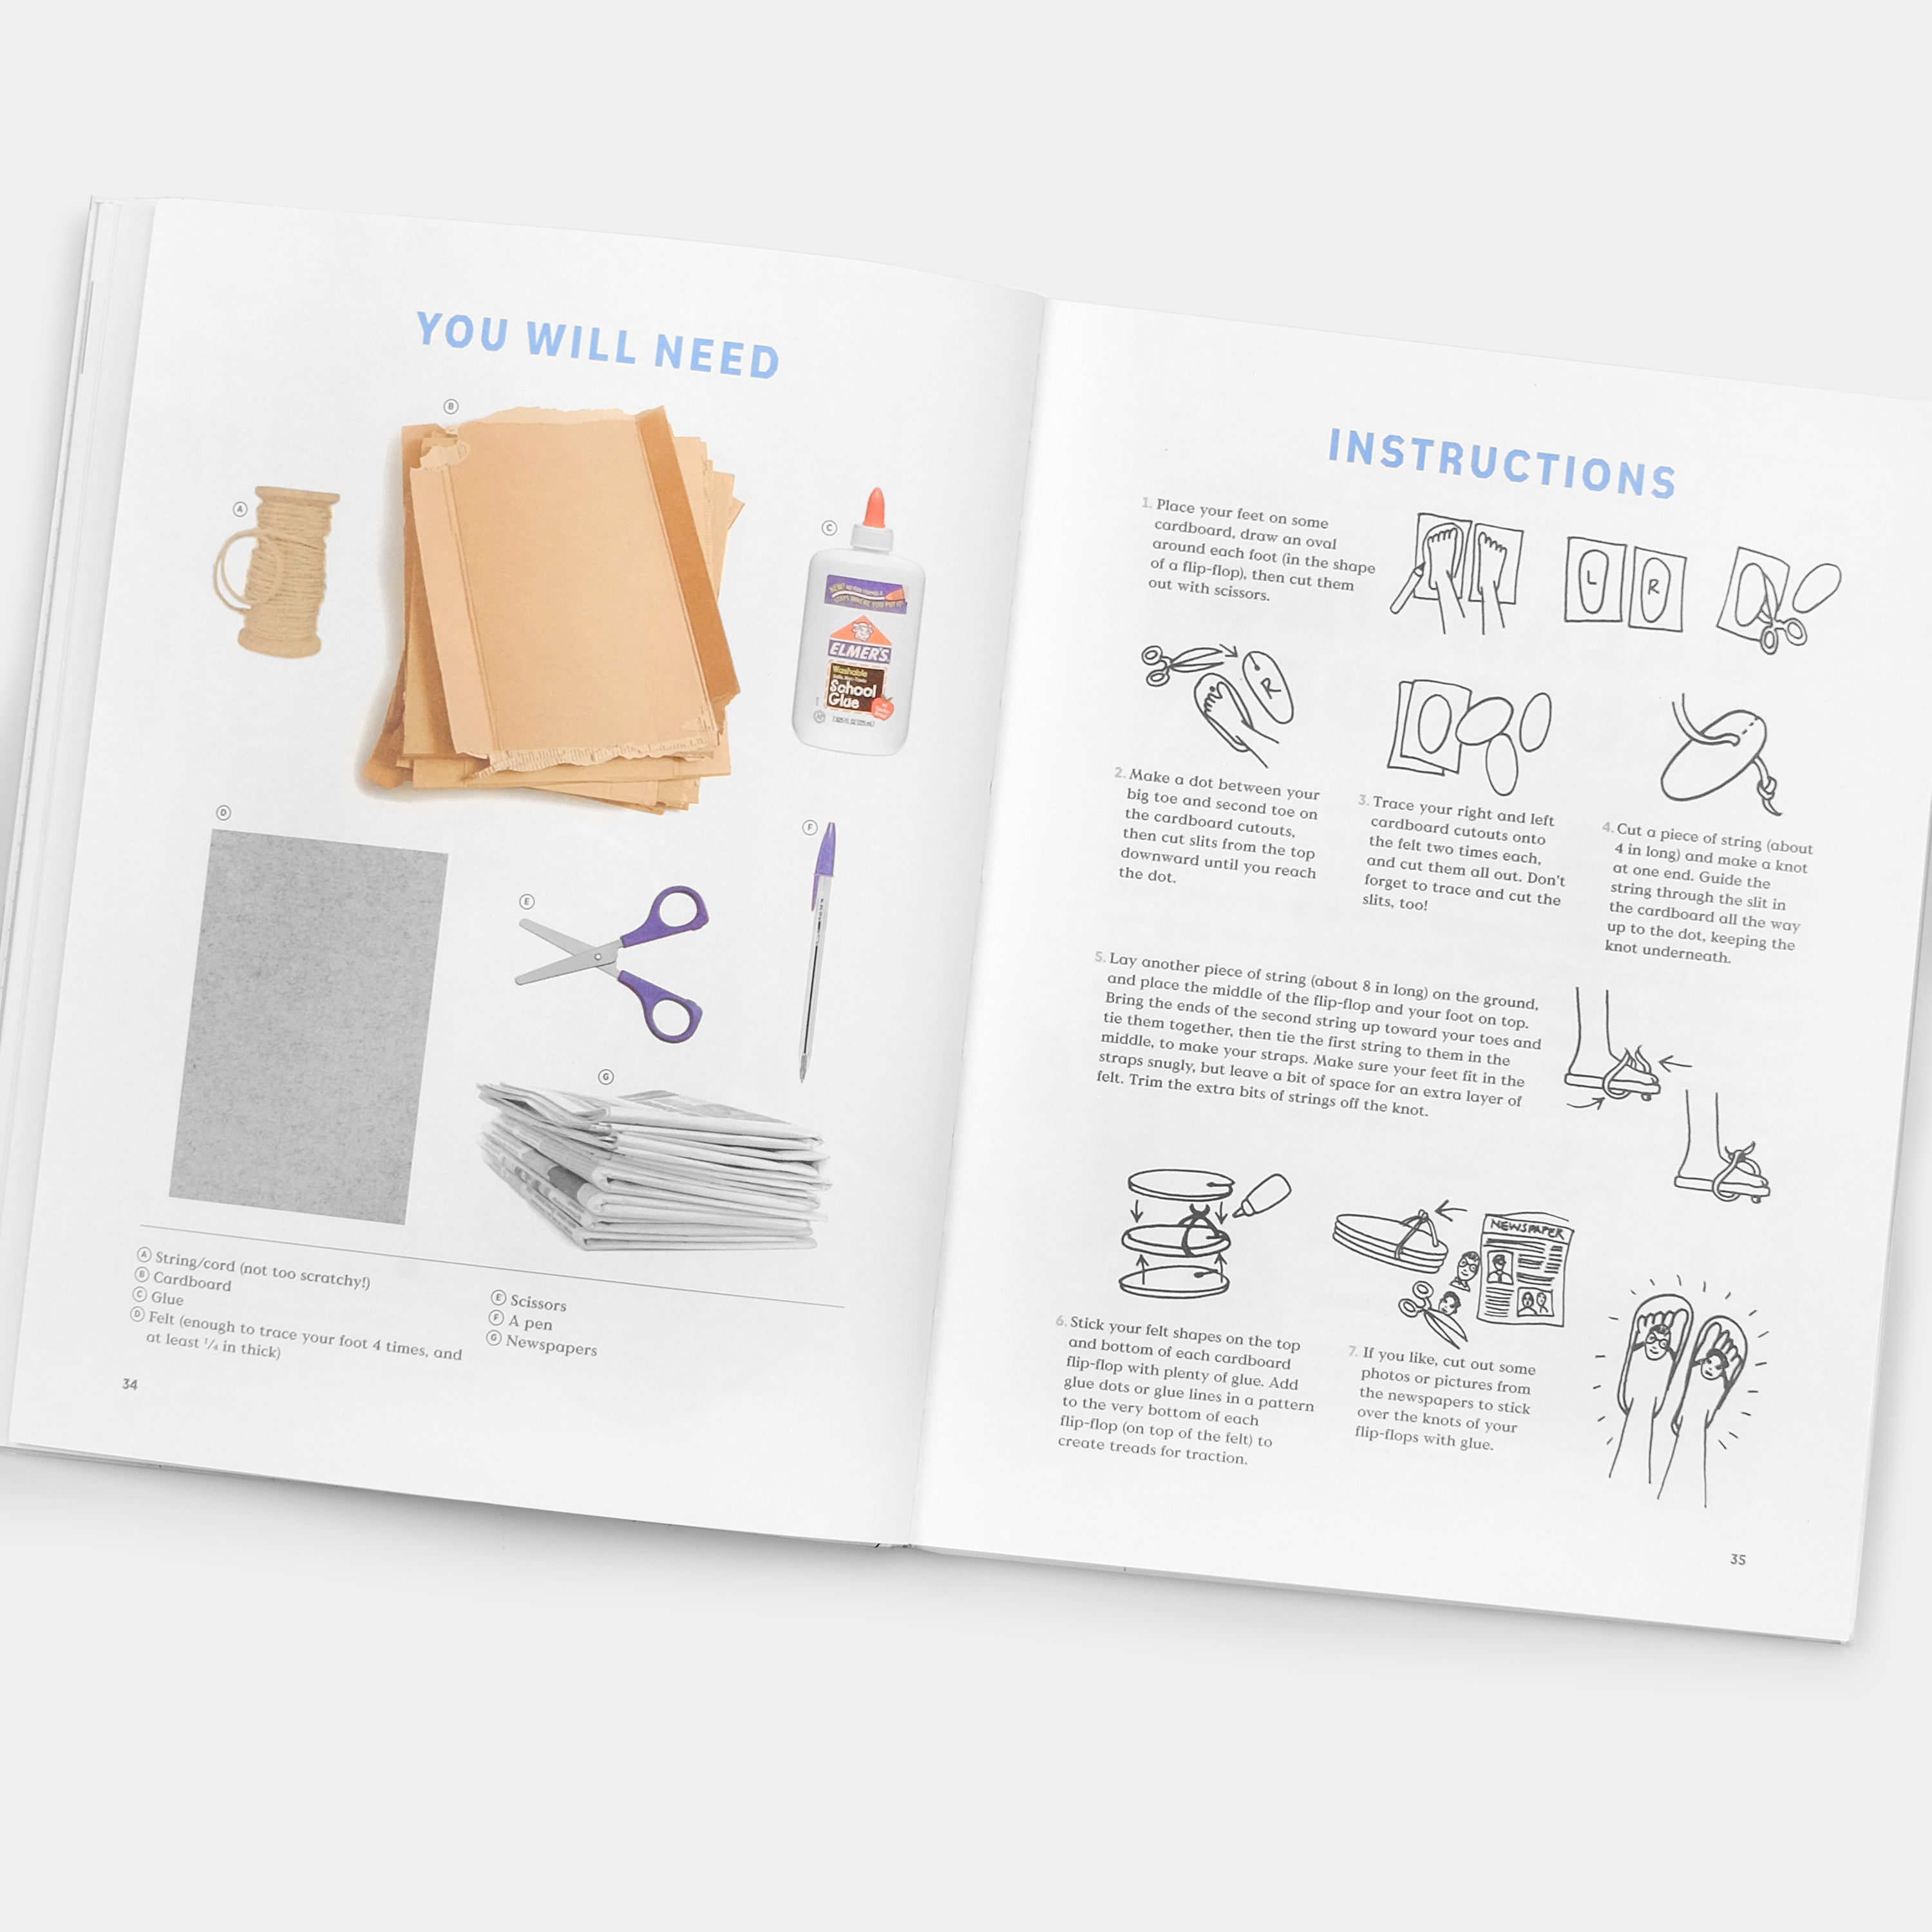 Now Make This: 24 DIY Projects by Designers for Kids by Thomas Barnthaler Phaidon Book